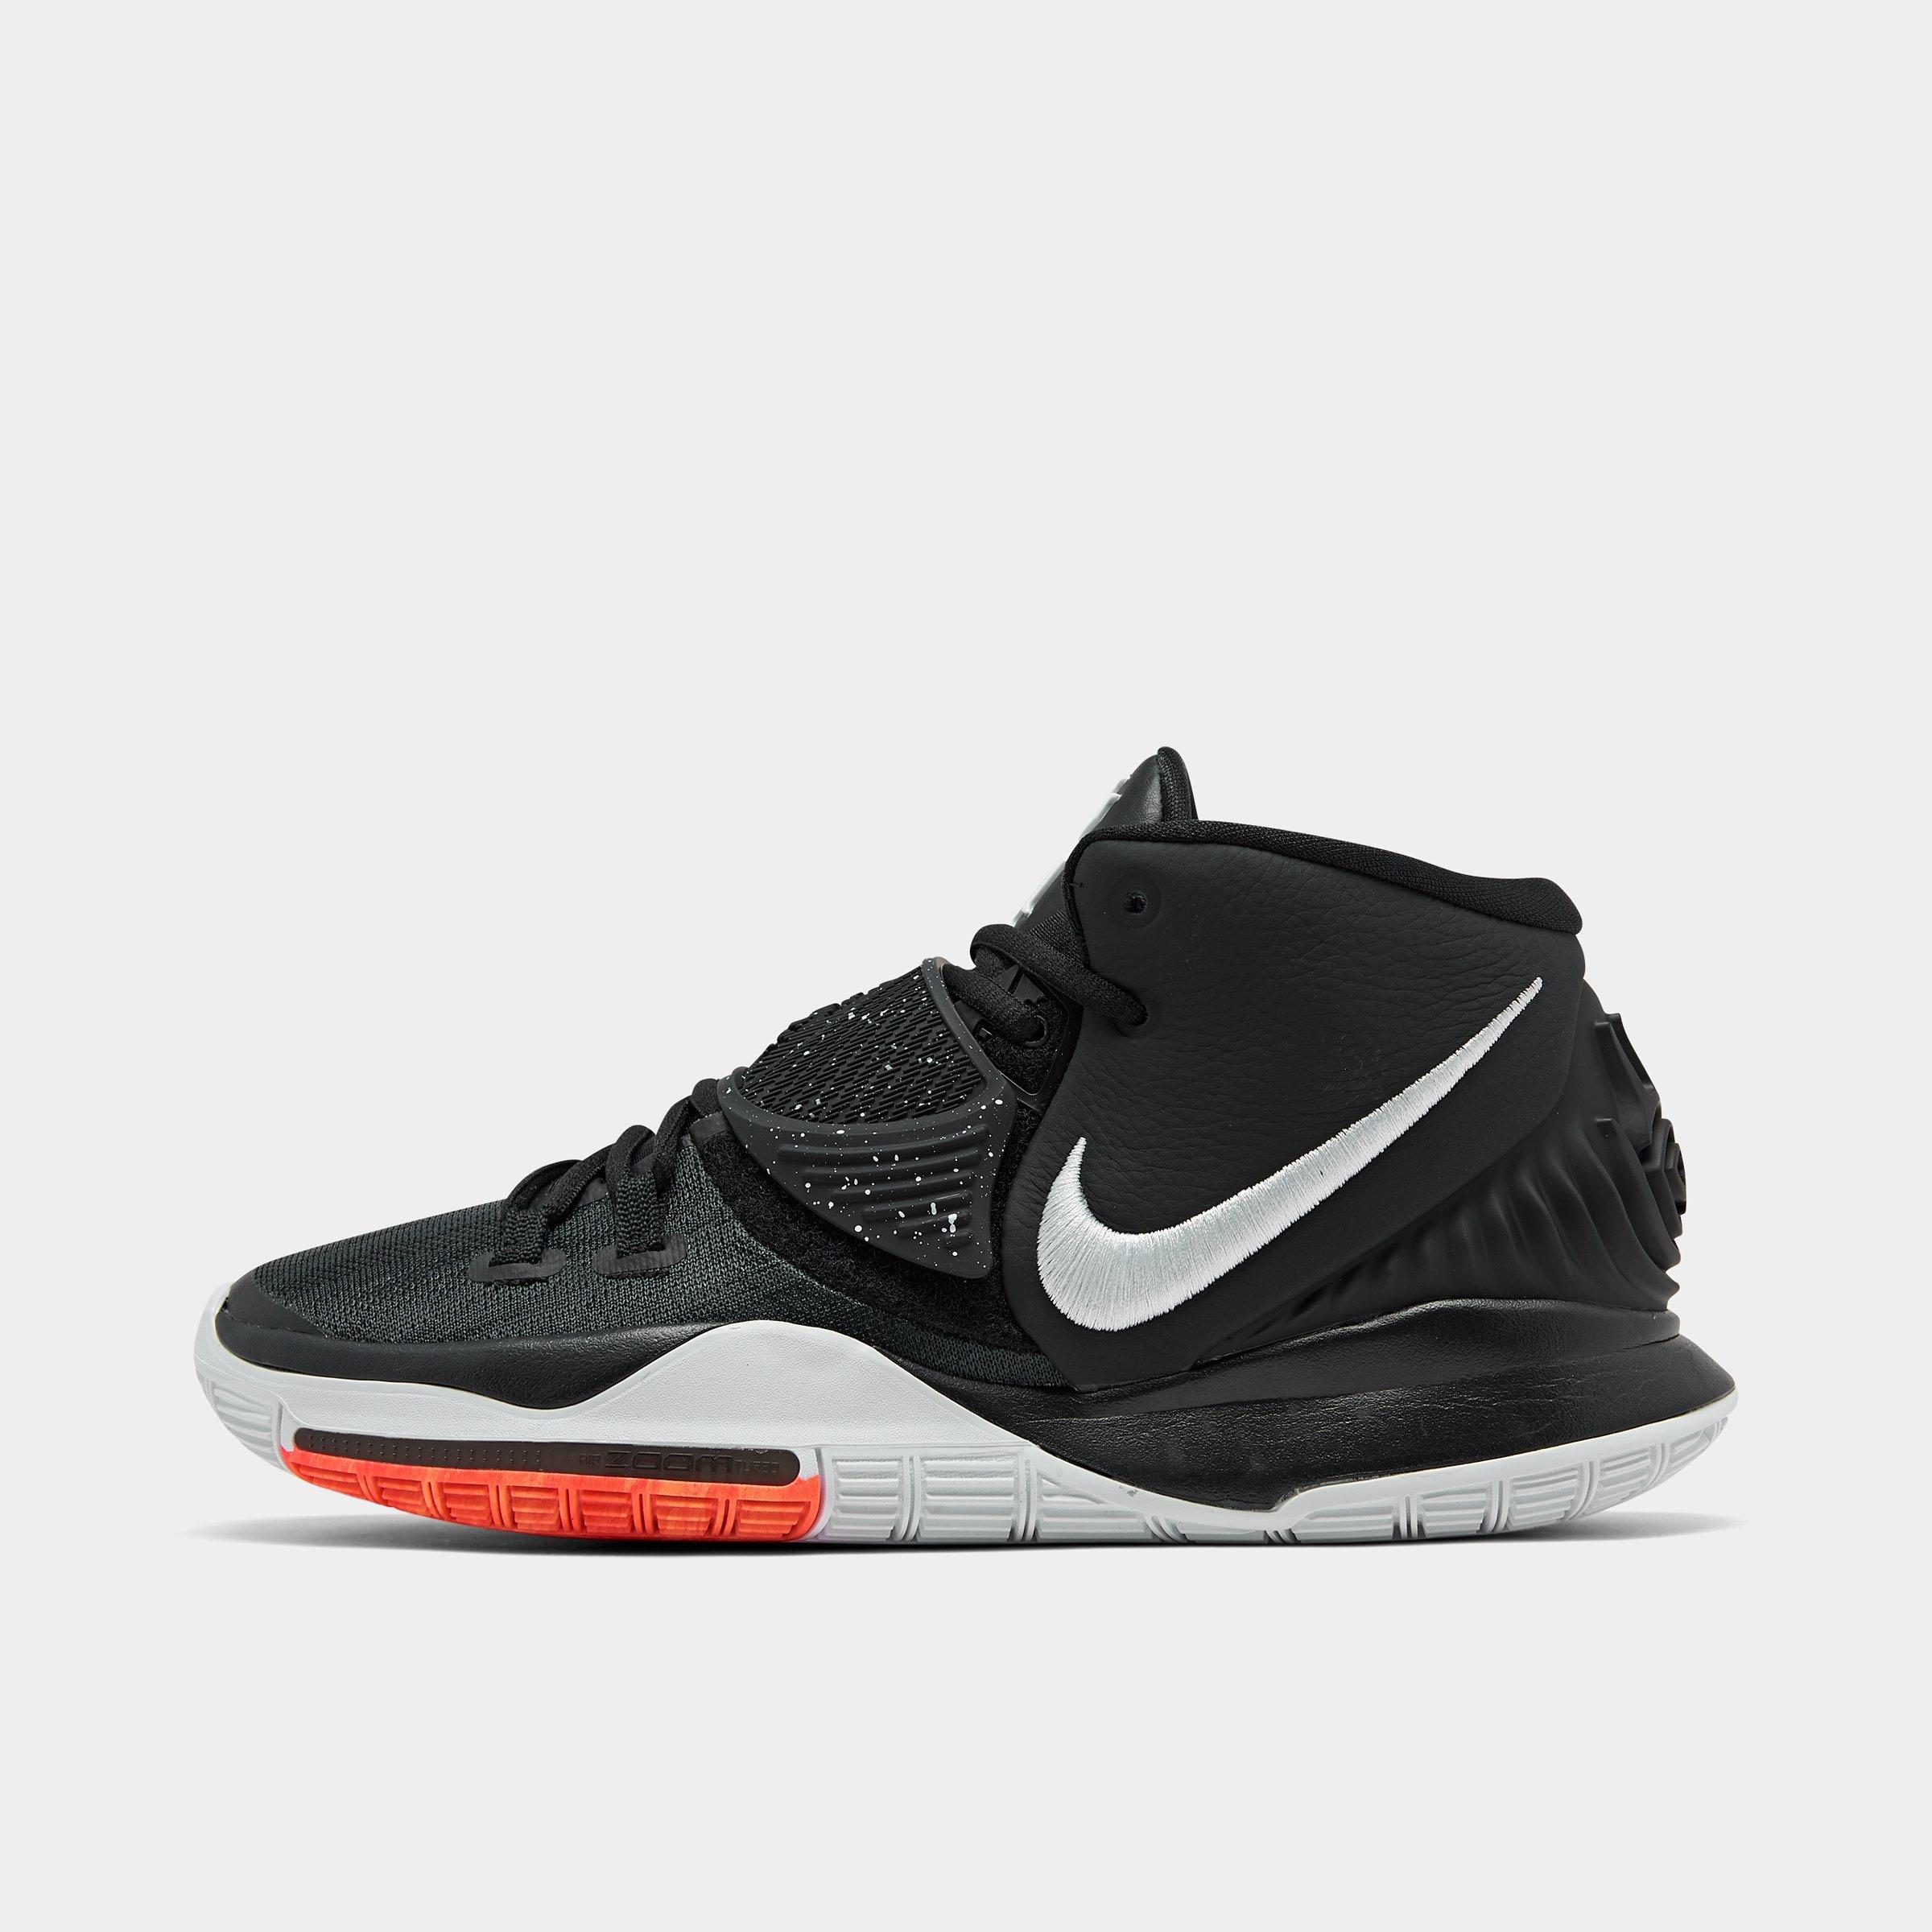 finish line basketball shoes mens